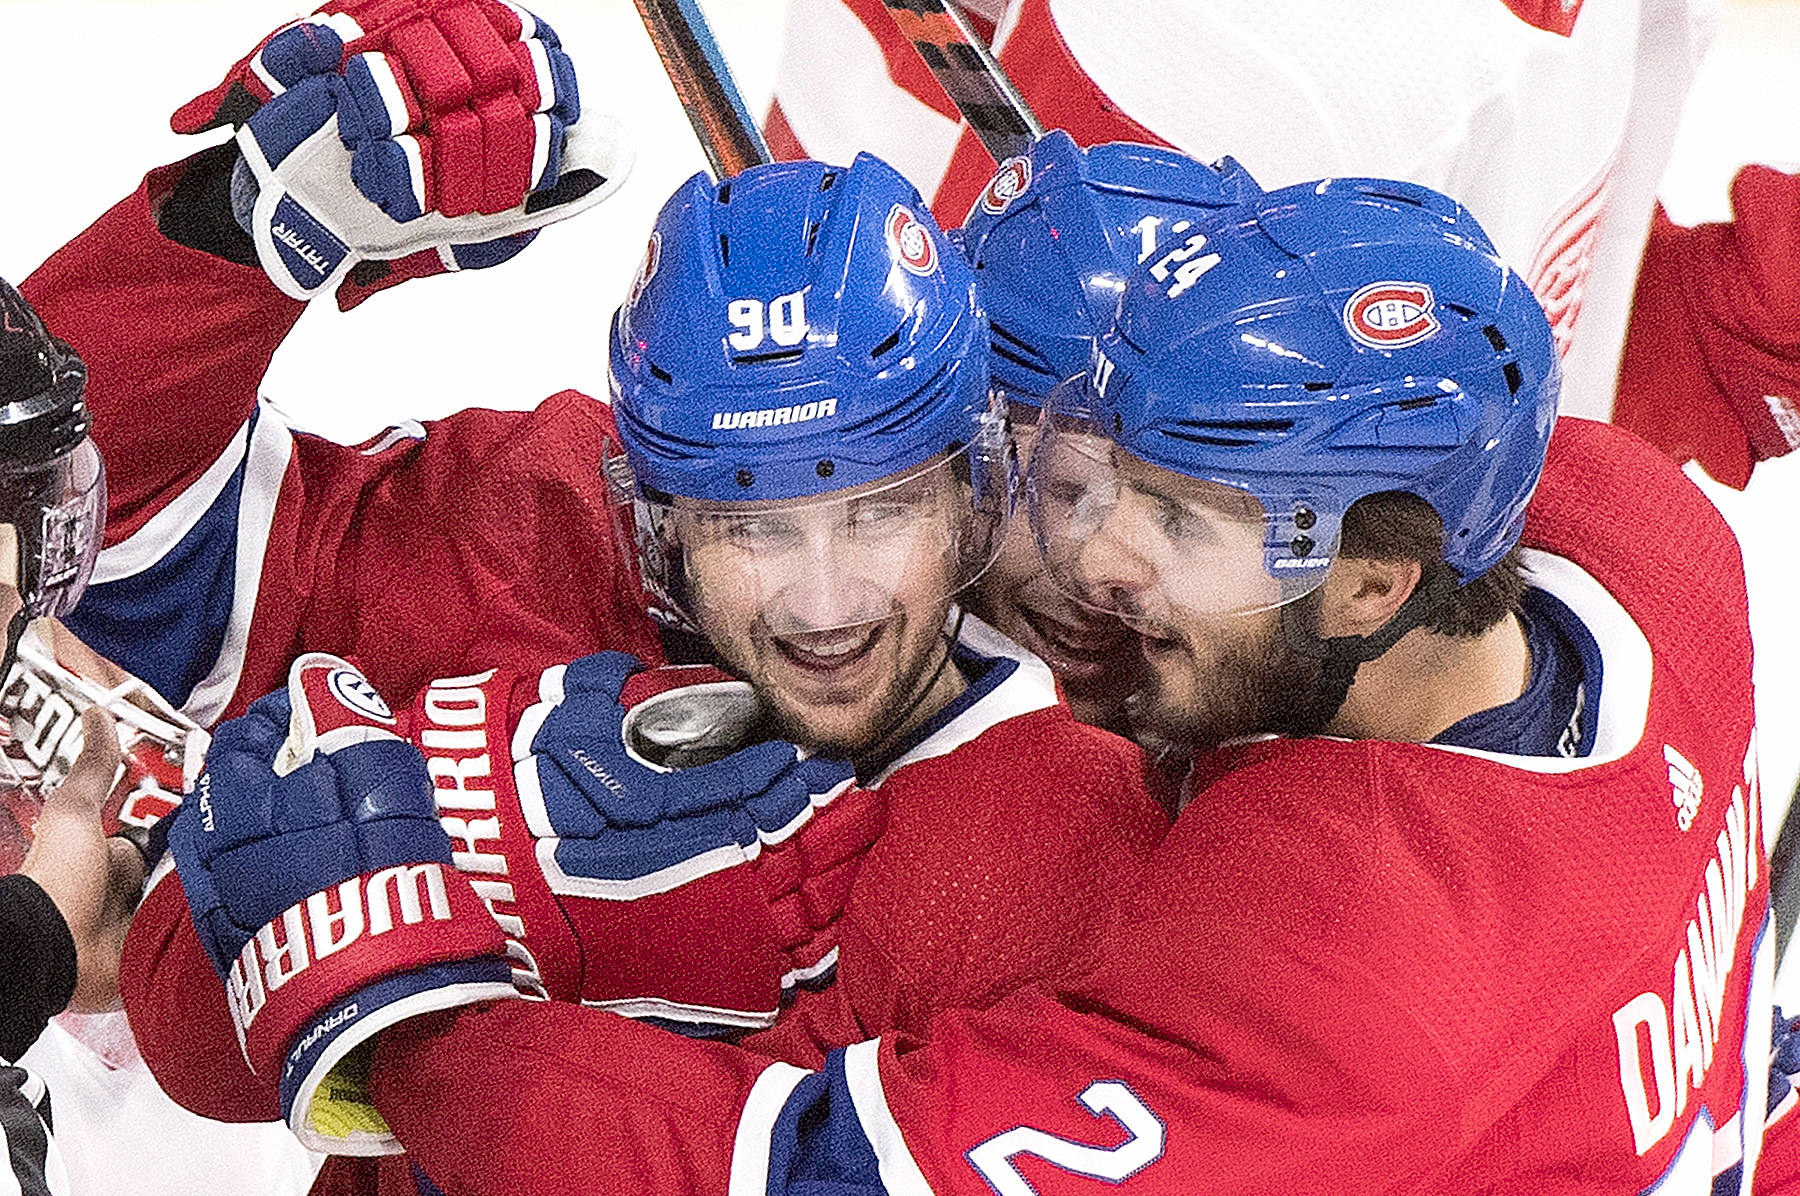 Montreal Canadiens’ Tomas Tatar, left, celebrates with teammate Phillip Danault, right, after scoring against the Detroit Red Wings during first period NHL hockey action in Montreal, Monday, Oct. 15, 2018. (Graham Hughes/The Canadian Press via AP)